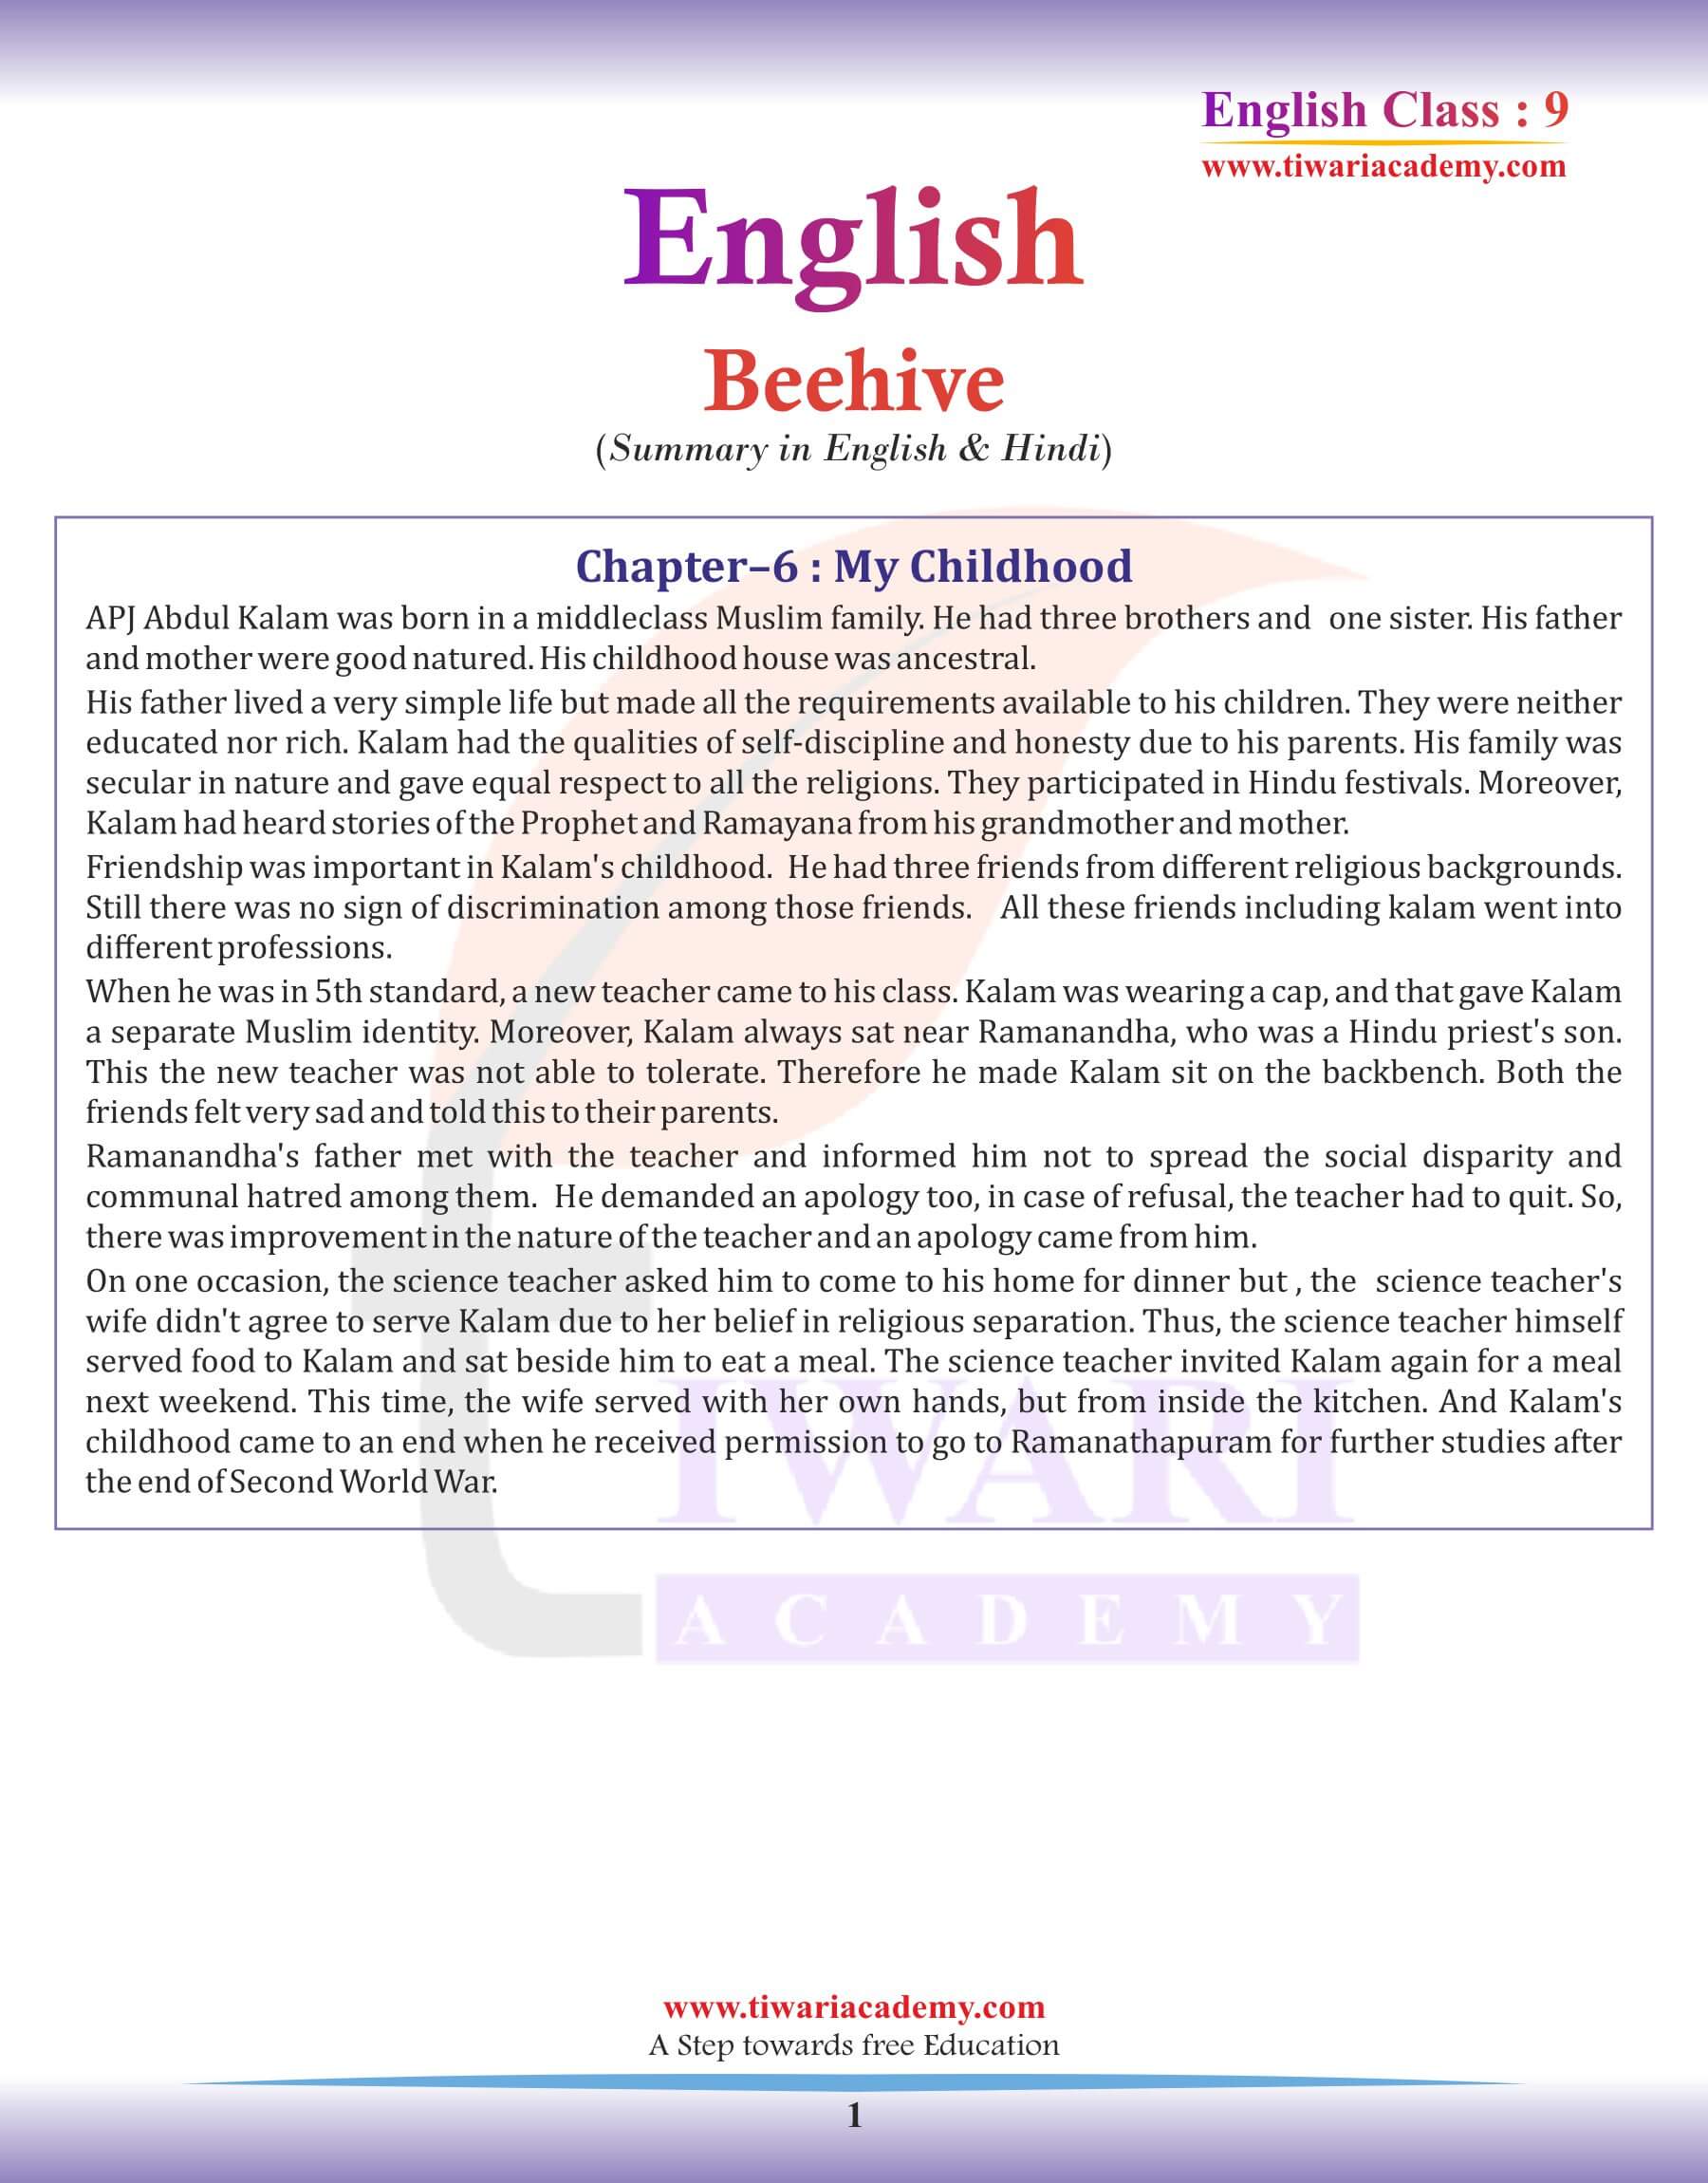 Class 9 English Beehive Chapter 6 Summary in English